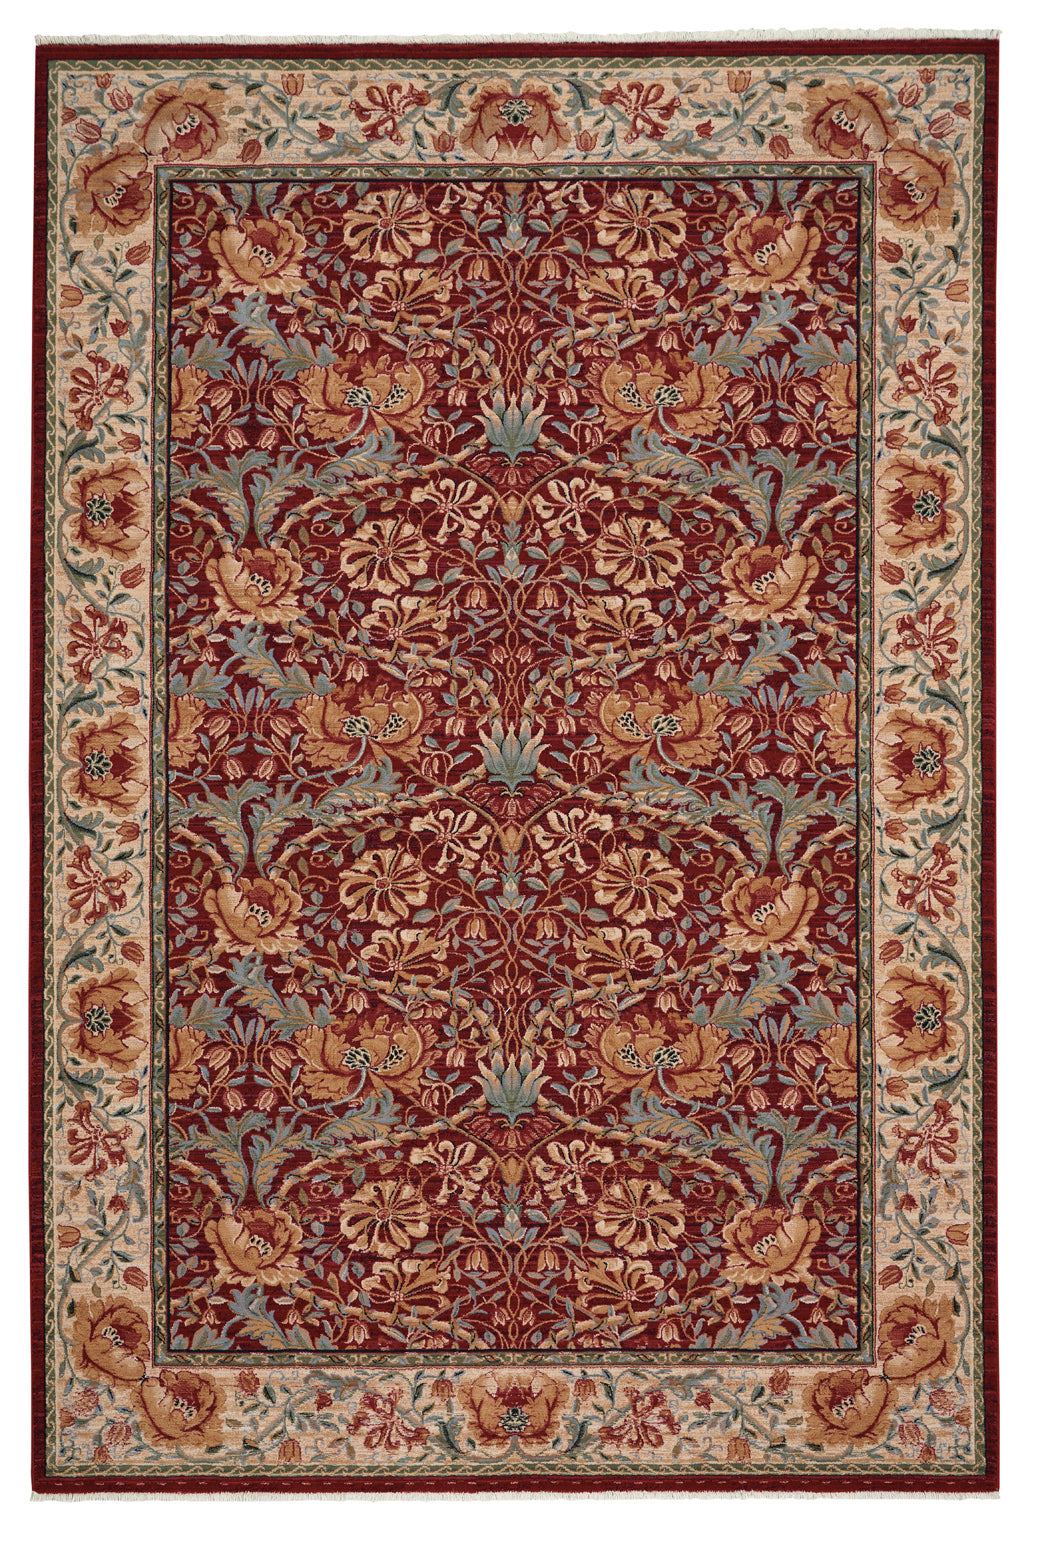 Lineage-Nouveau Machine Woven Rug Red Ivory